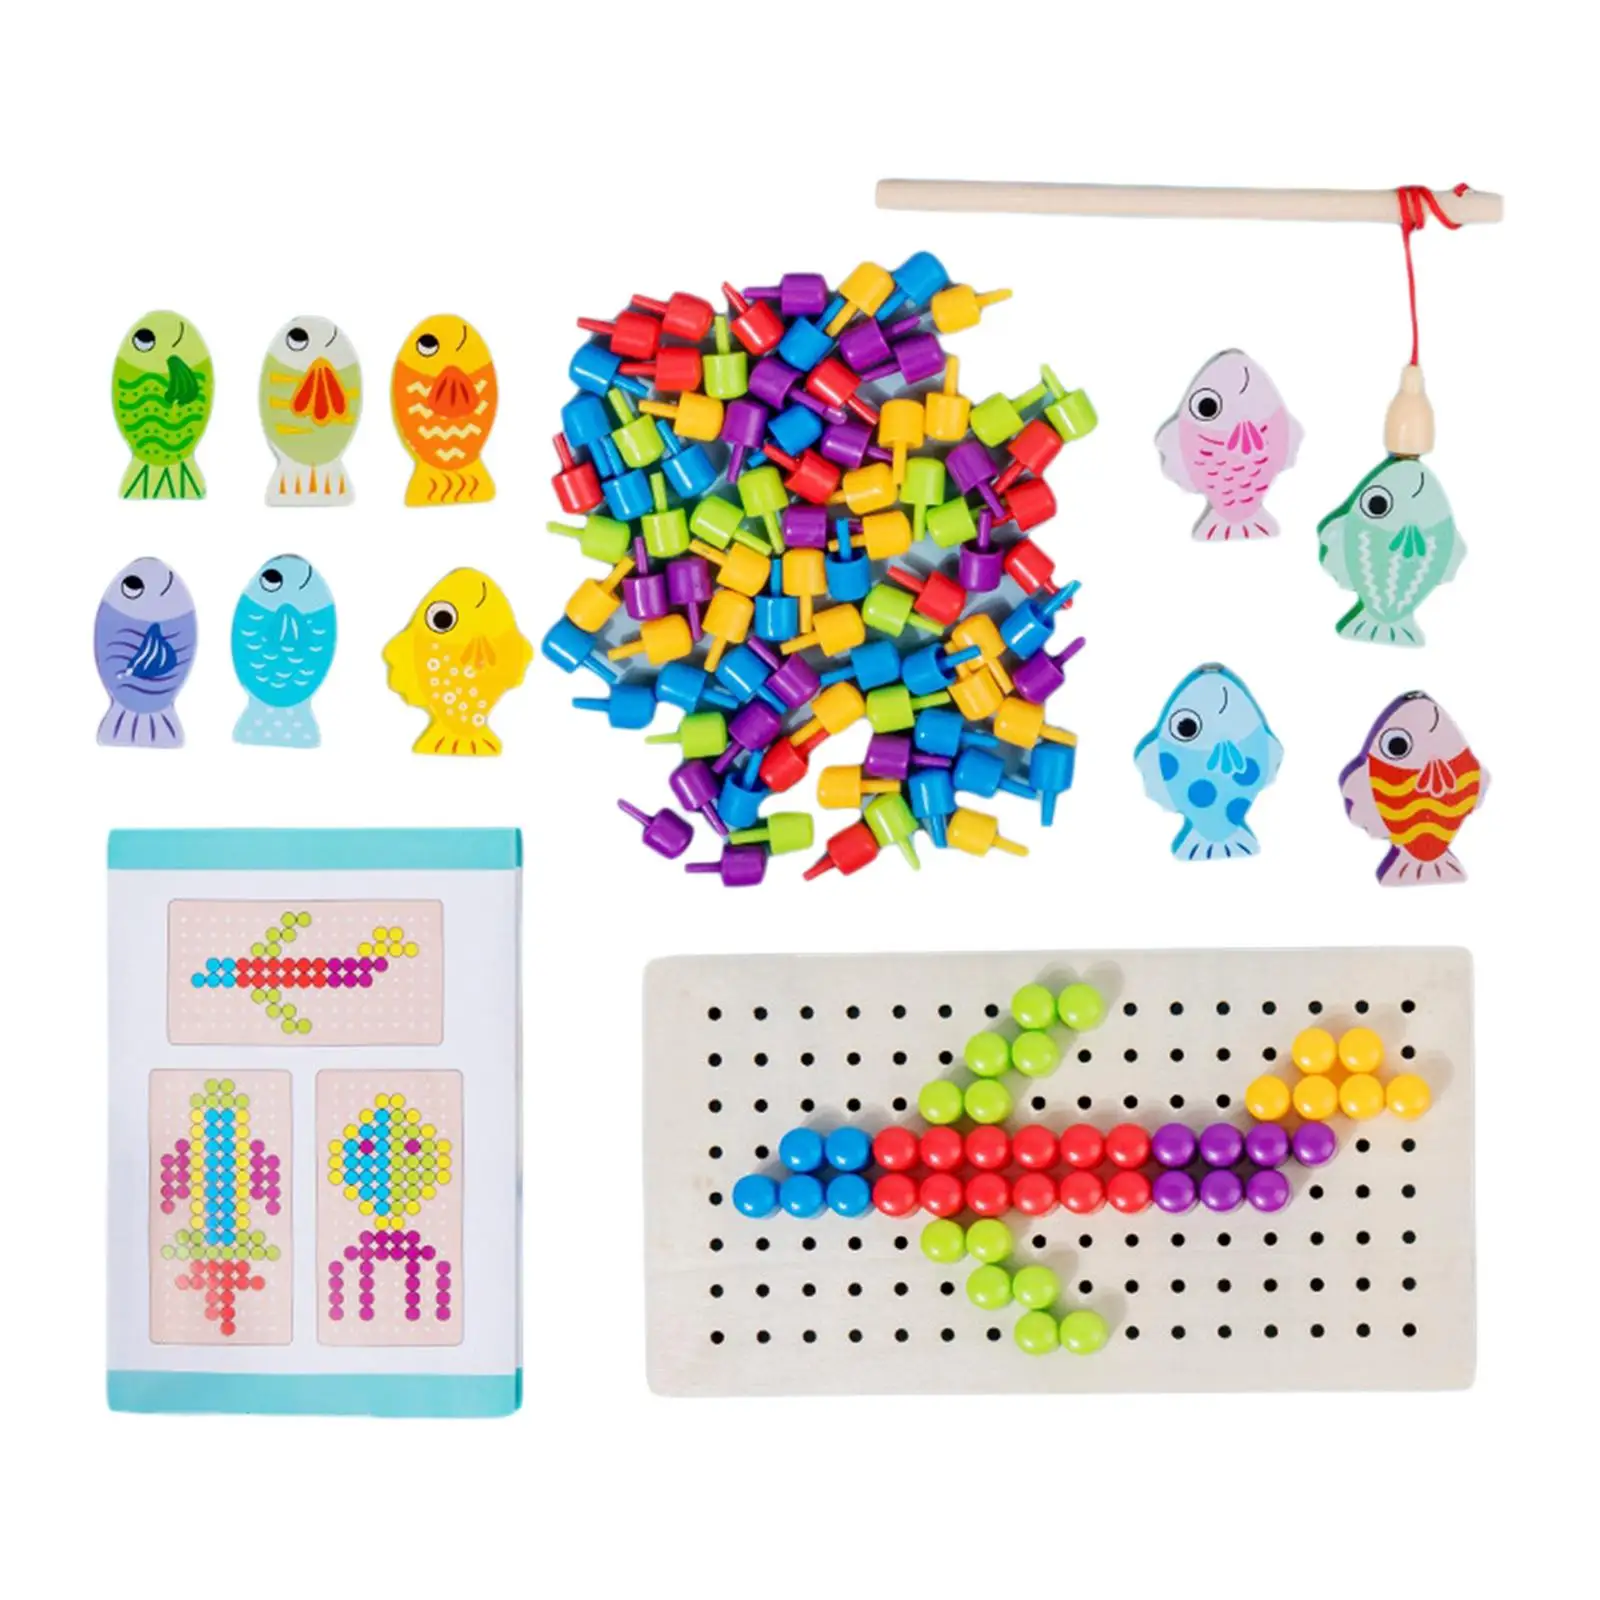 Fishing Toys Novelty Party Game Toy Fishing Board Game Fishing Game Play Set for Girls Kids Children Boys Birthday Gifts